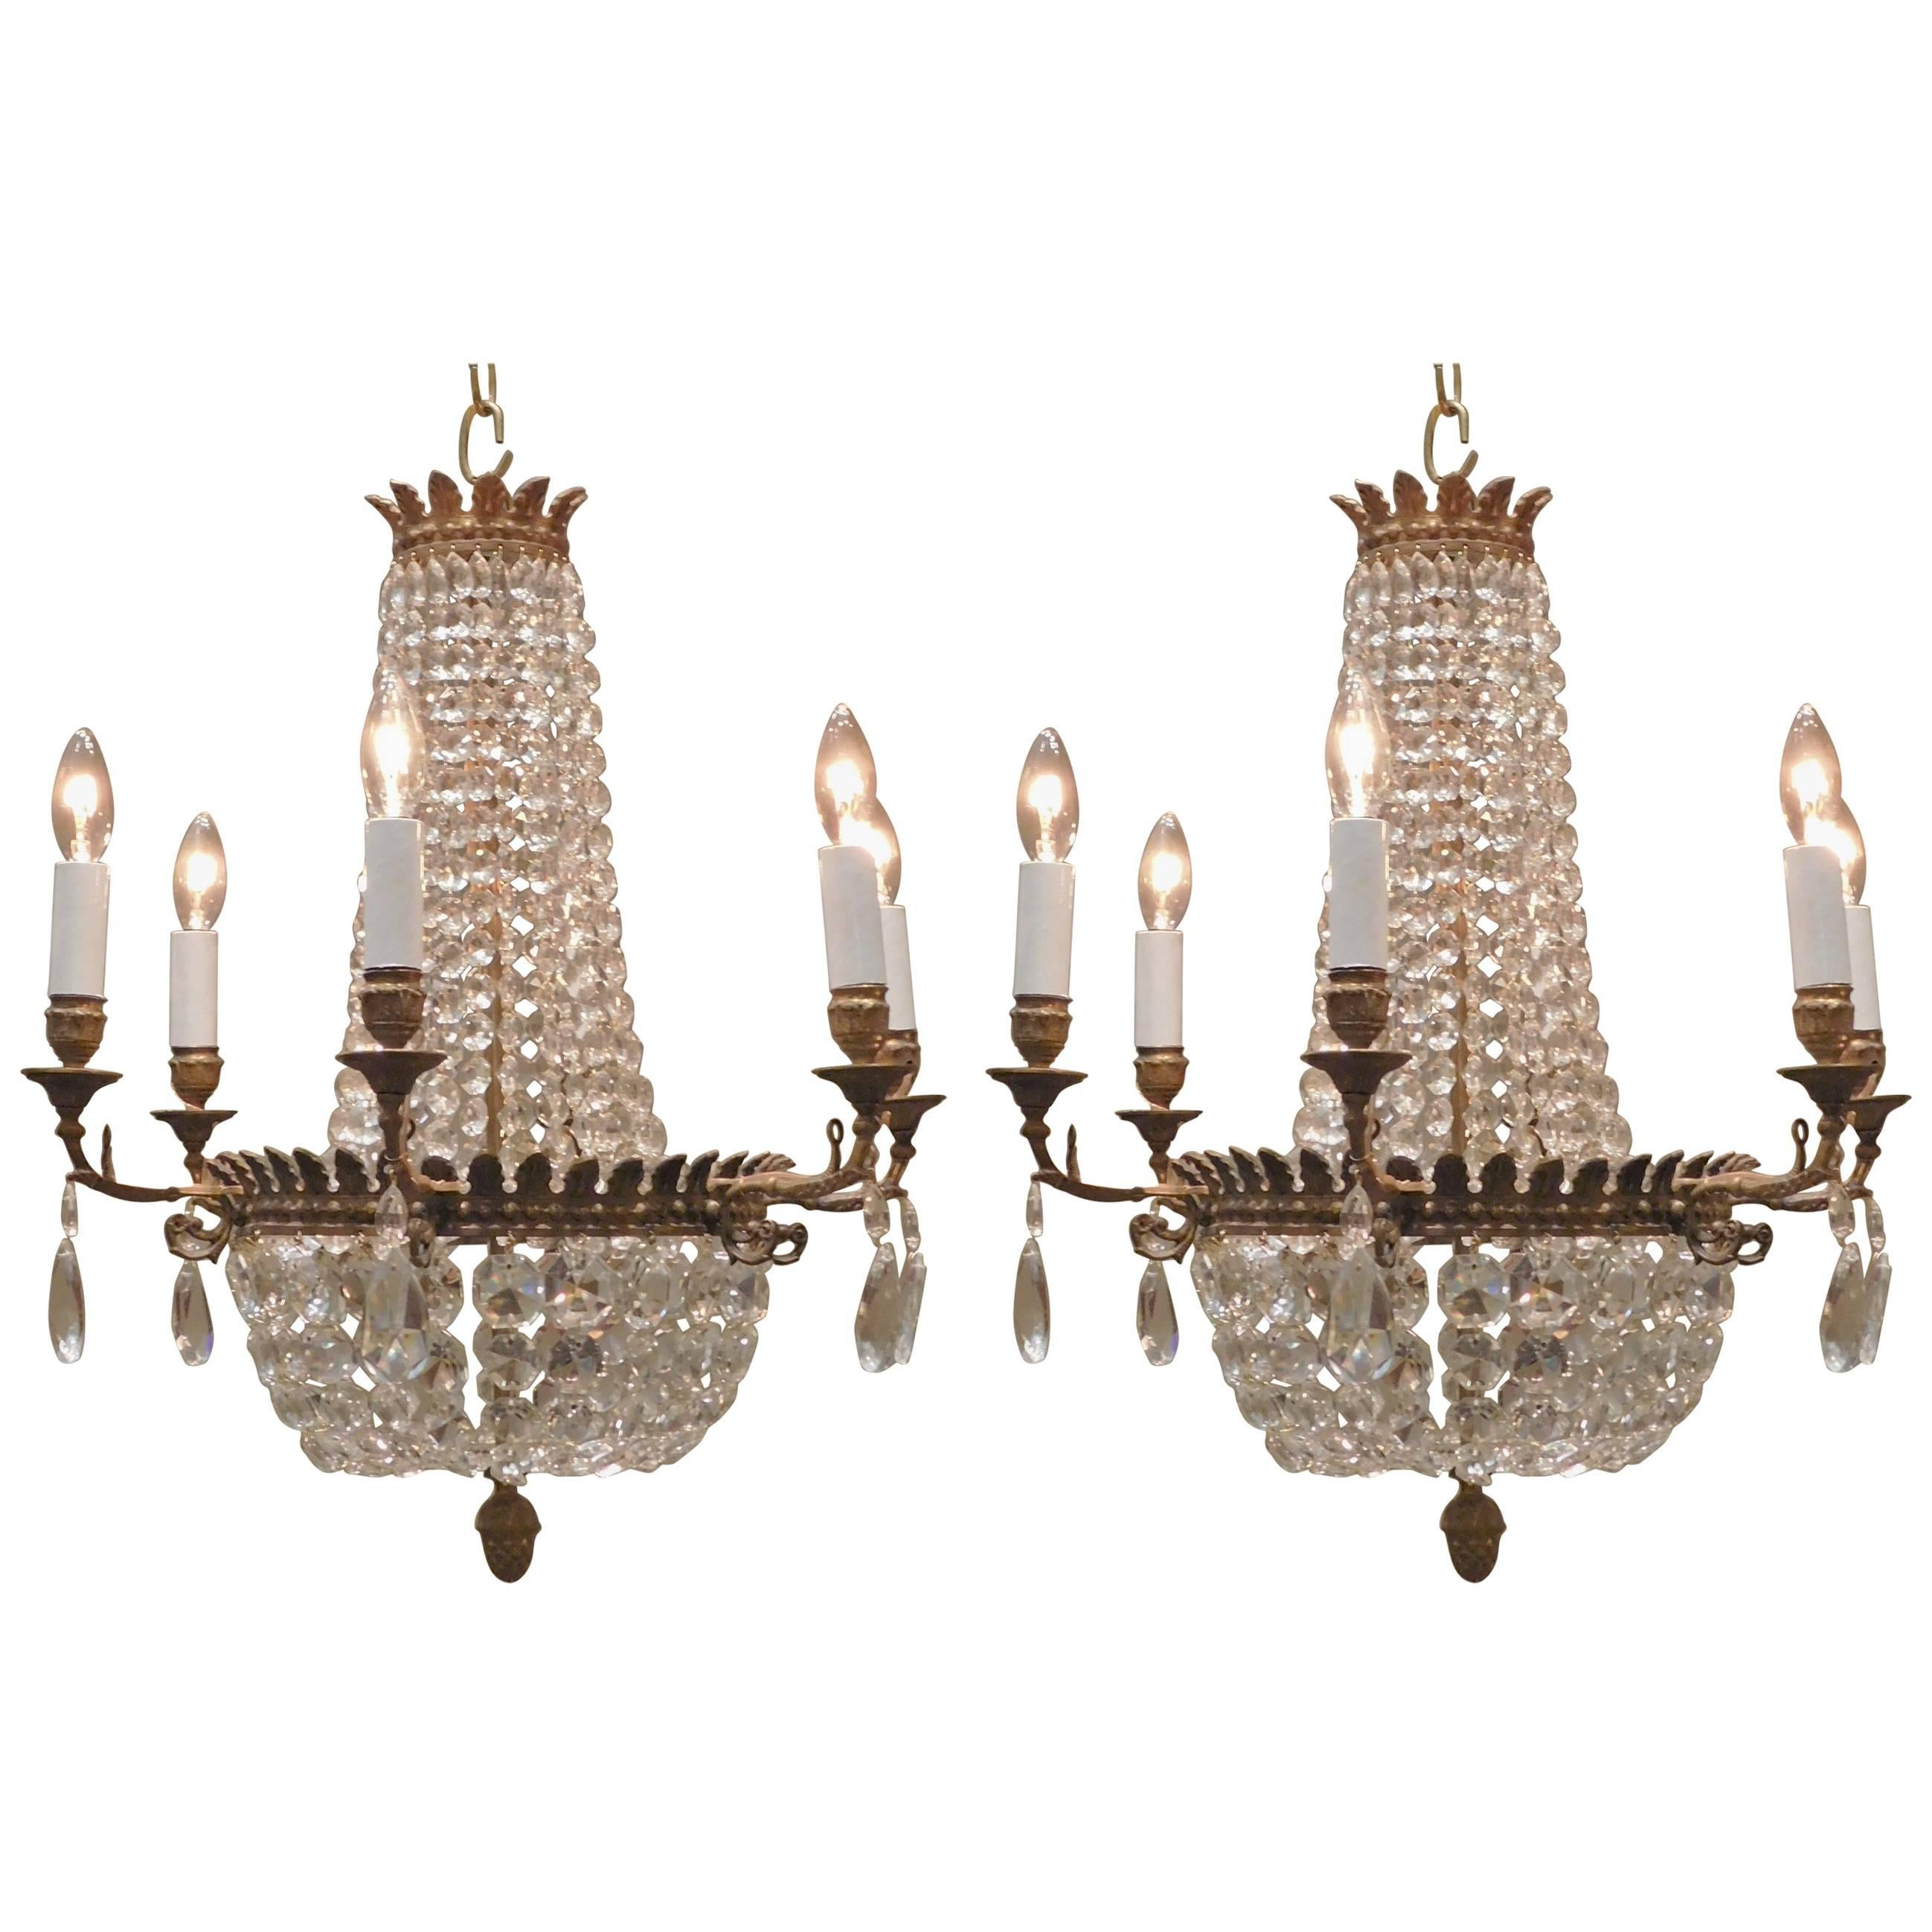 Pair of Neo-Classic Style Six-Light Bronze Chandeliers, France, circa 1890